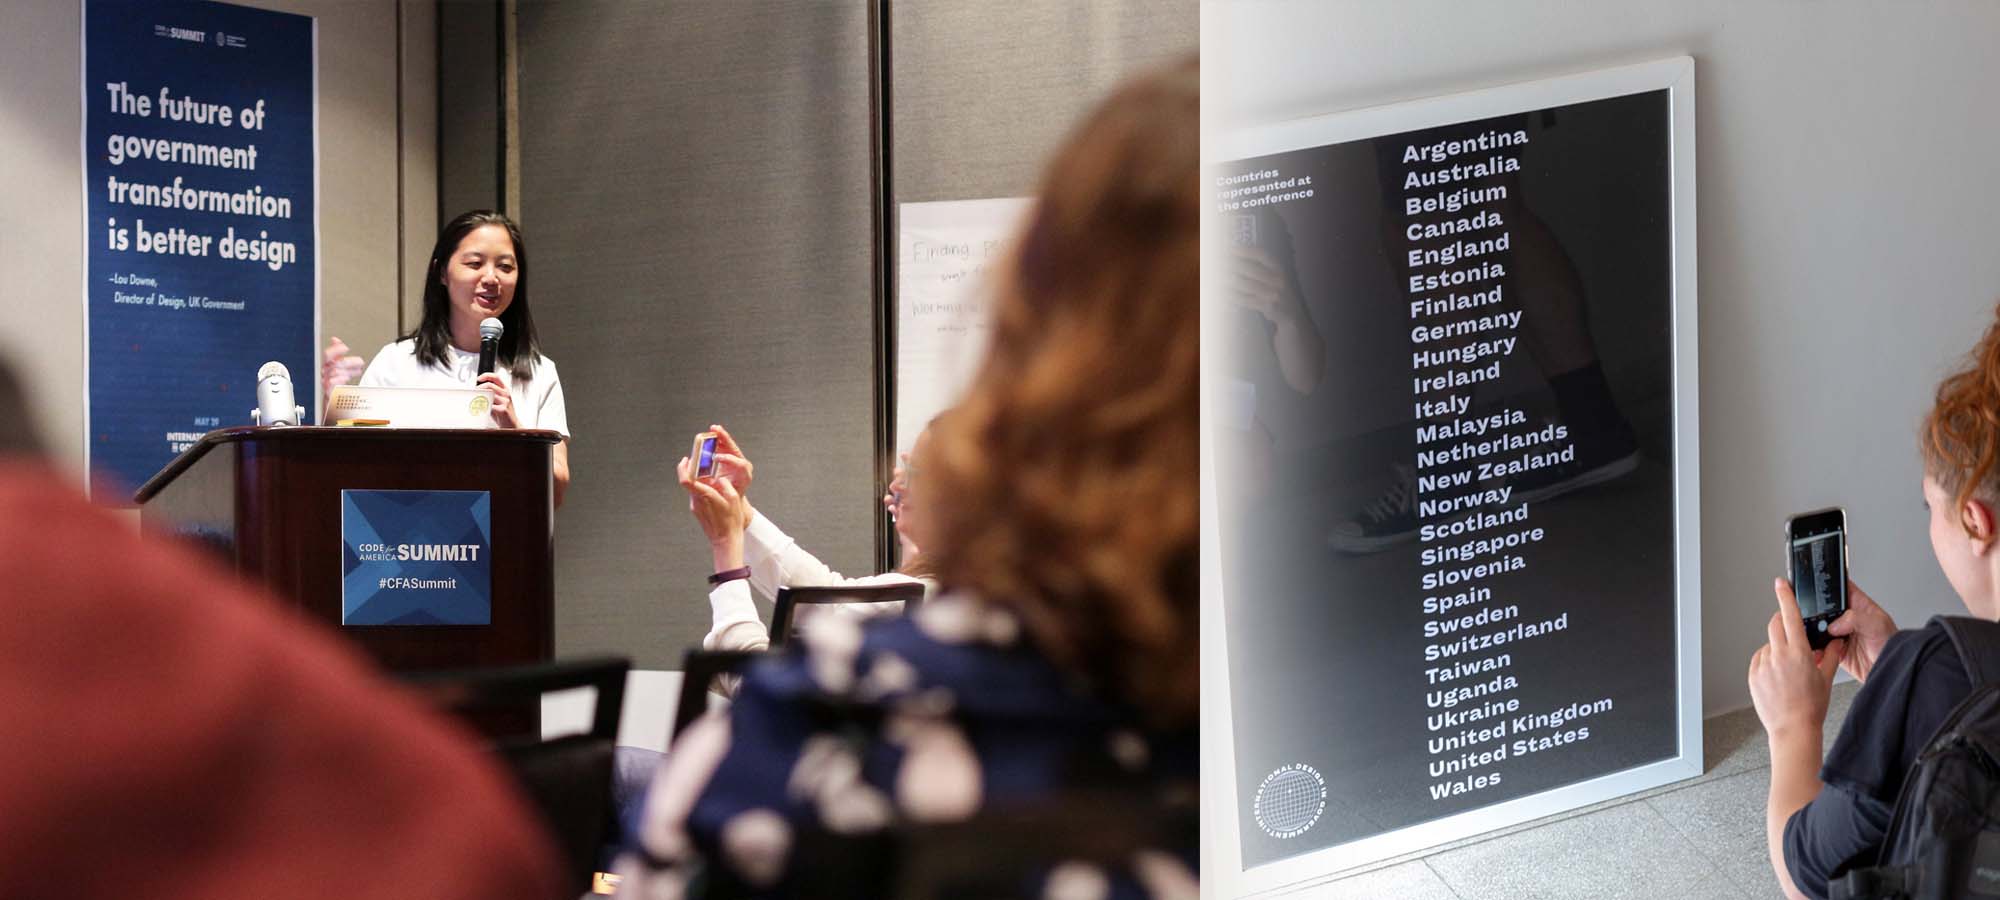 A woman speaking at a community conference, a young woman taking a picture of a long list of countries represented in the community